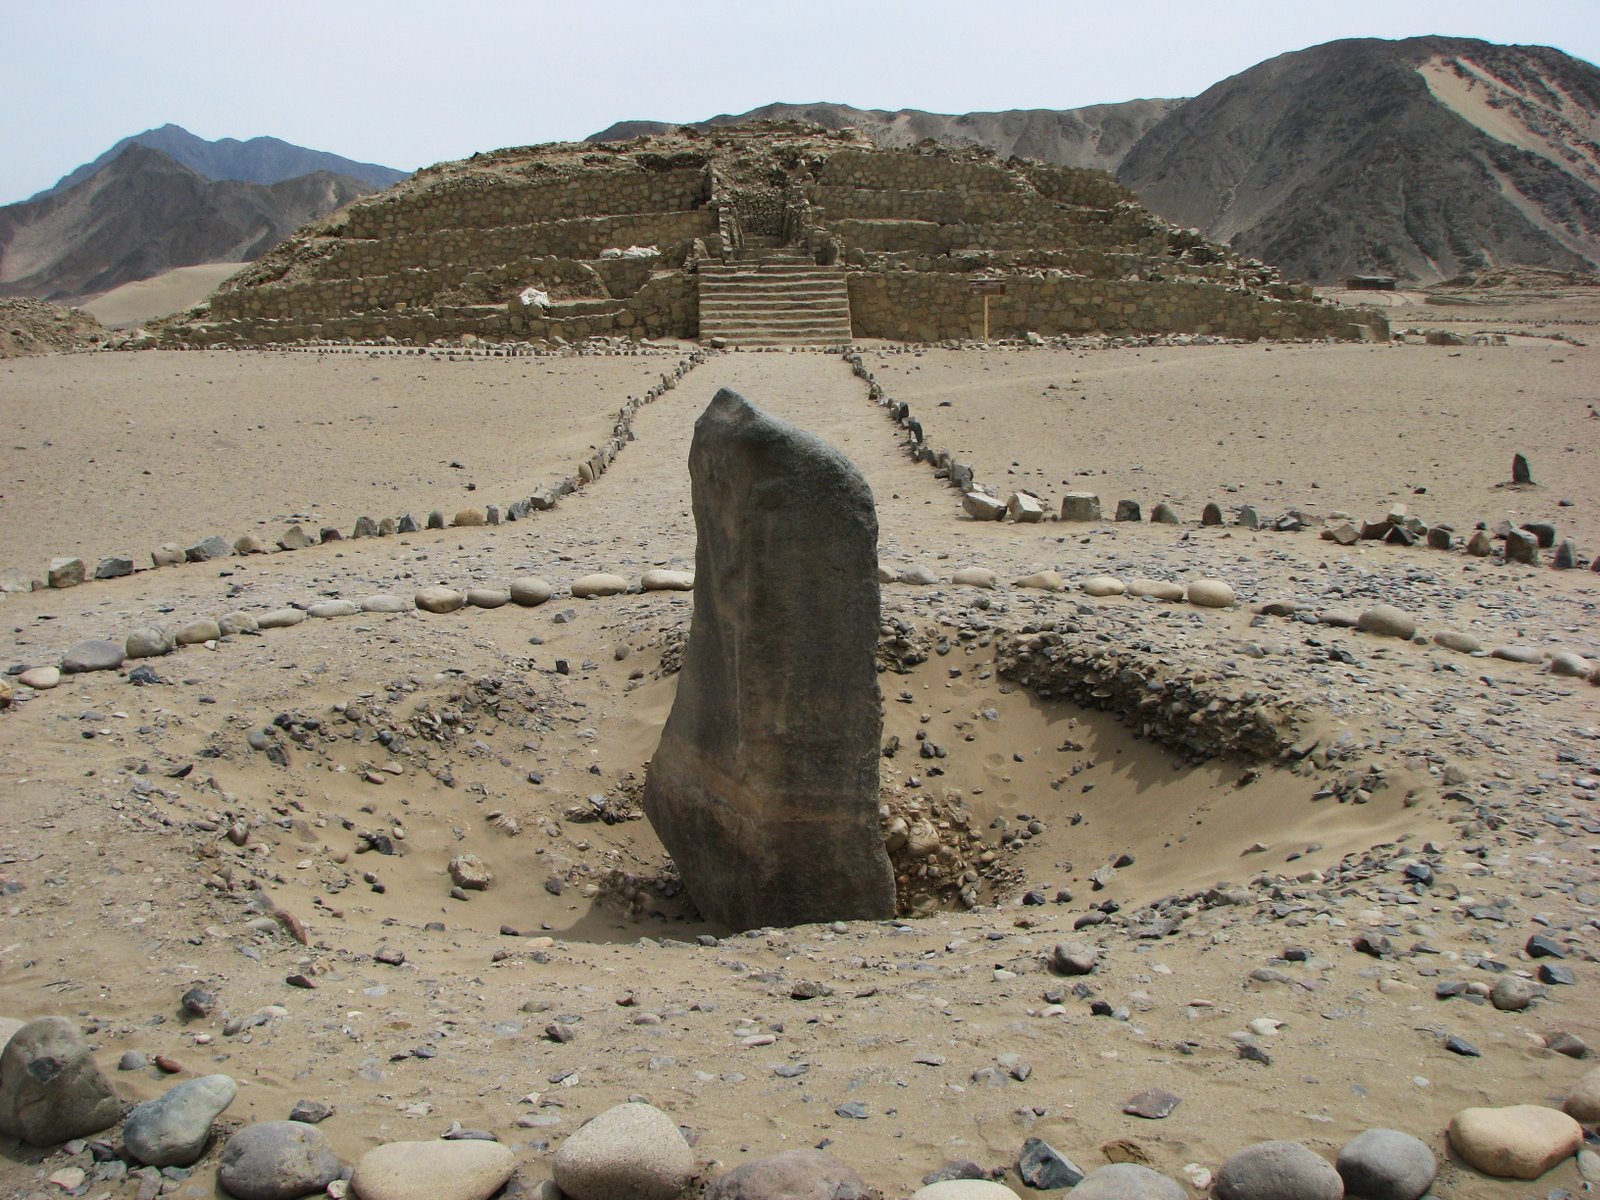 [Monolith+La+Huanca+with+Pyramid+of+the+Huanca+behind+it.JPG]